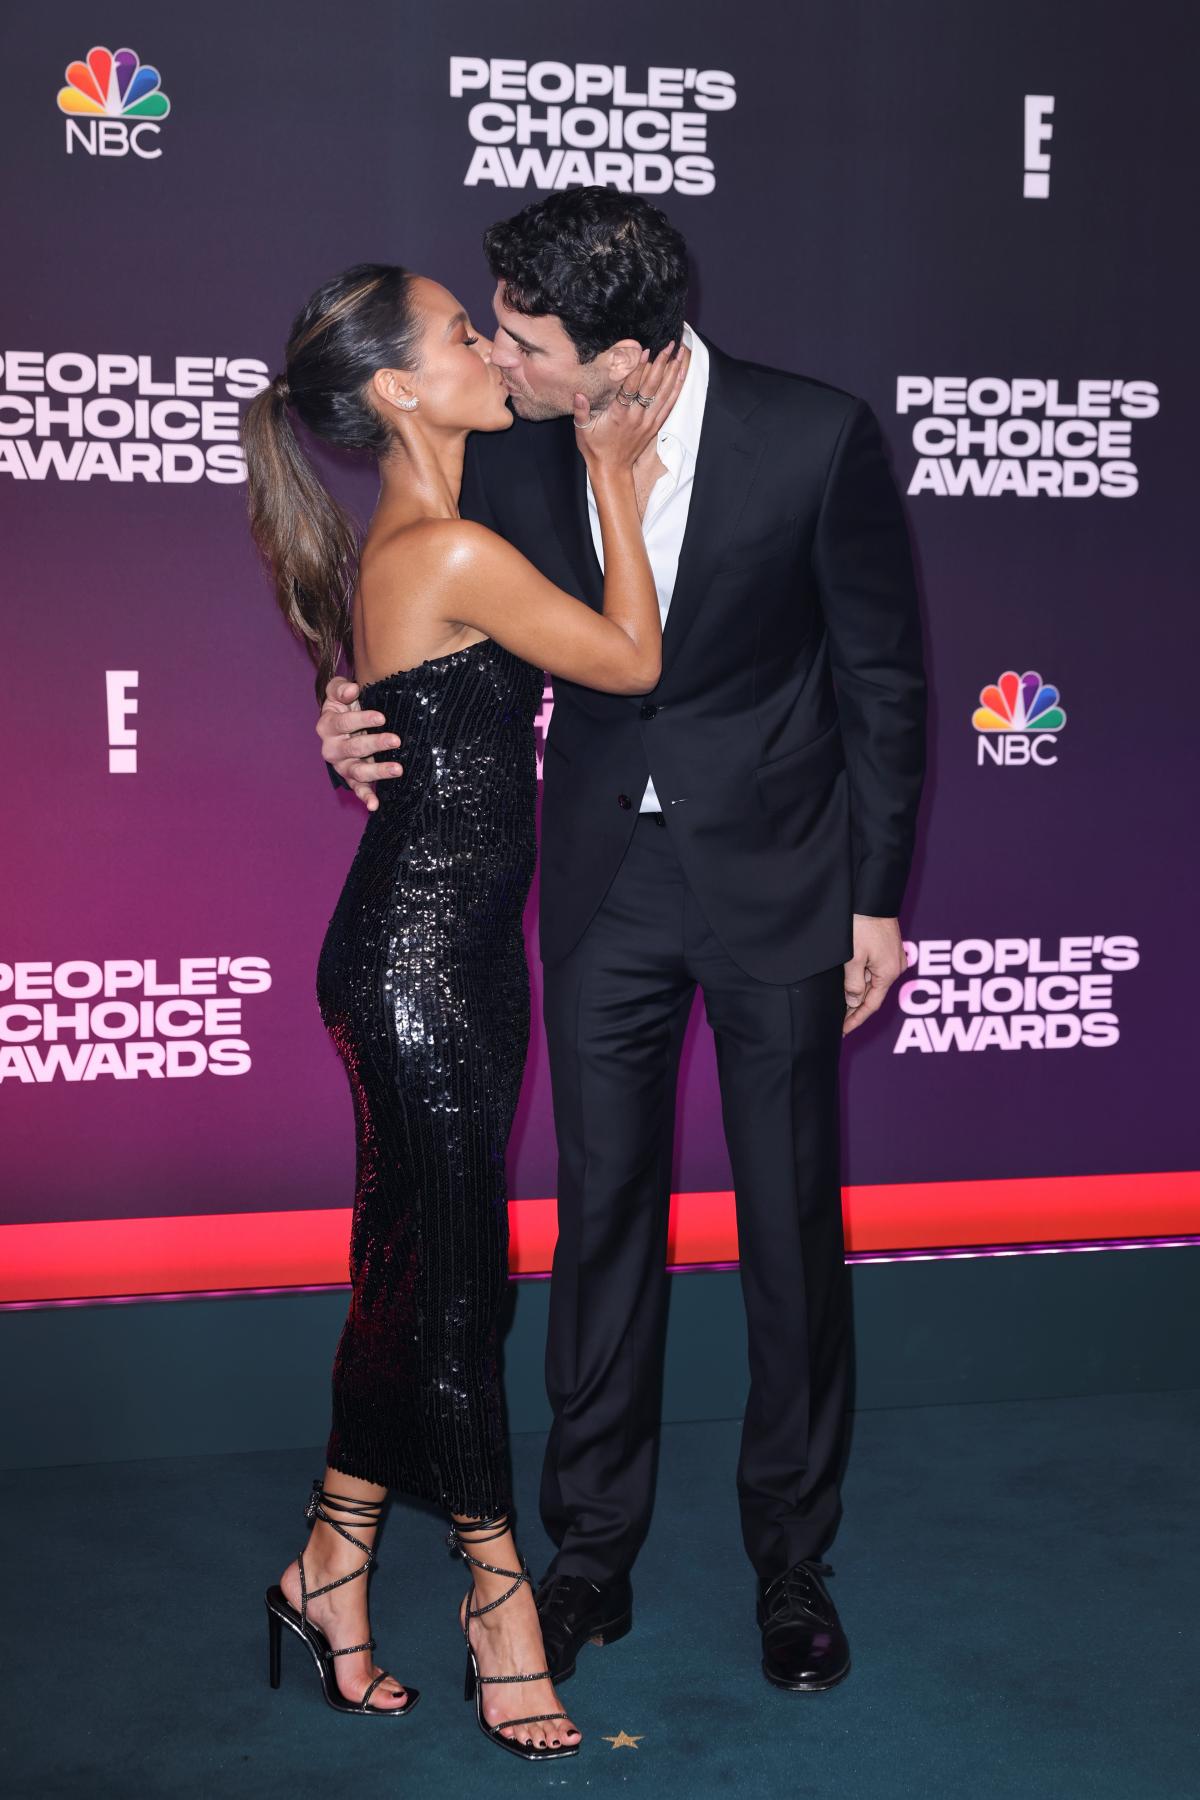 People's Choice Awards / REUTERS